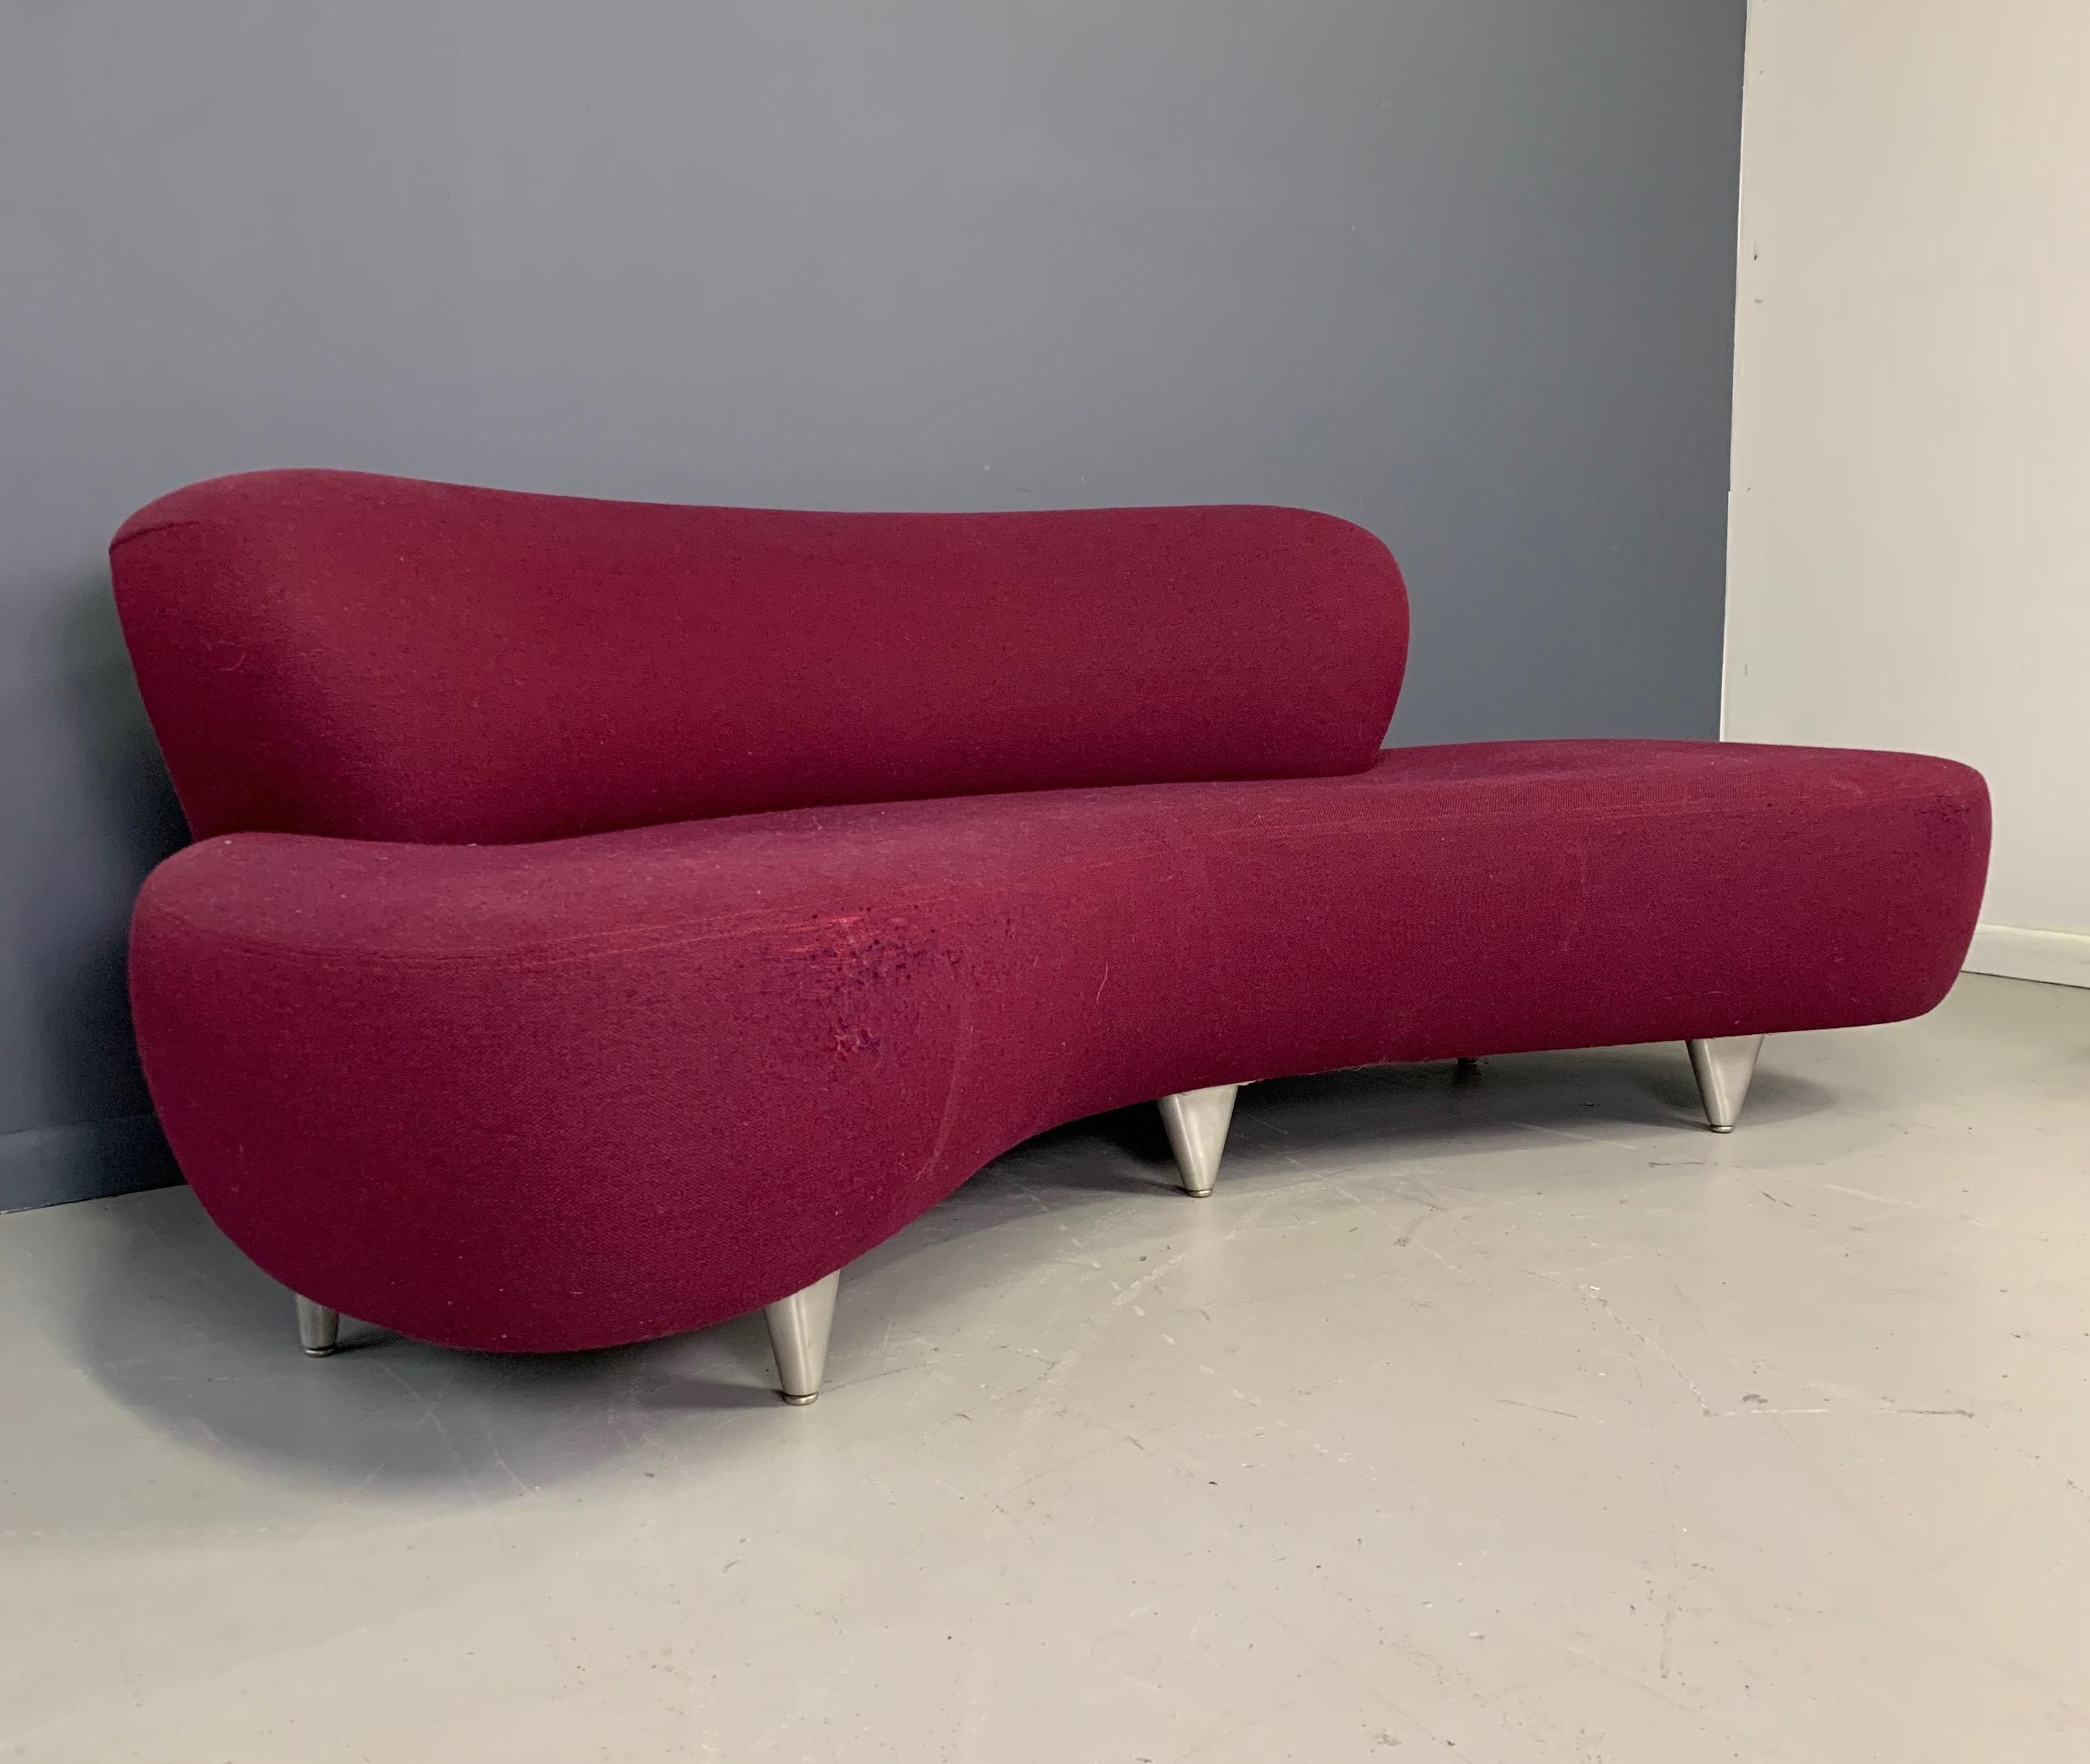 Modernica sofa from 1970s. Iconic Mid-Century Modern It is in original upholstered fabric. This sofa has 6 tapered aluminum legs which is a rarity for Modernica.
Re-upholstery service available in different fabrics/COM (Customer Owned Material).